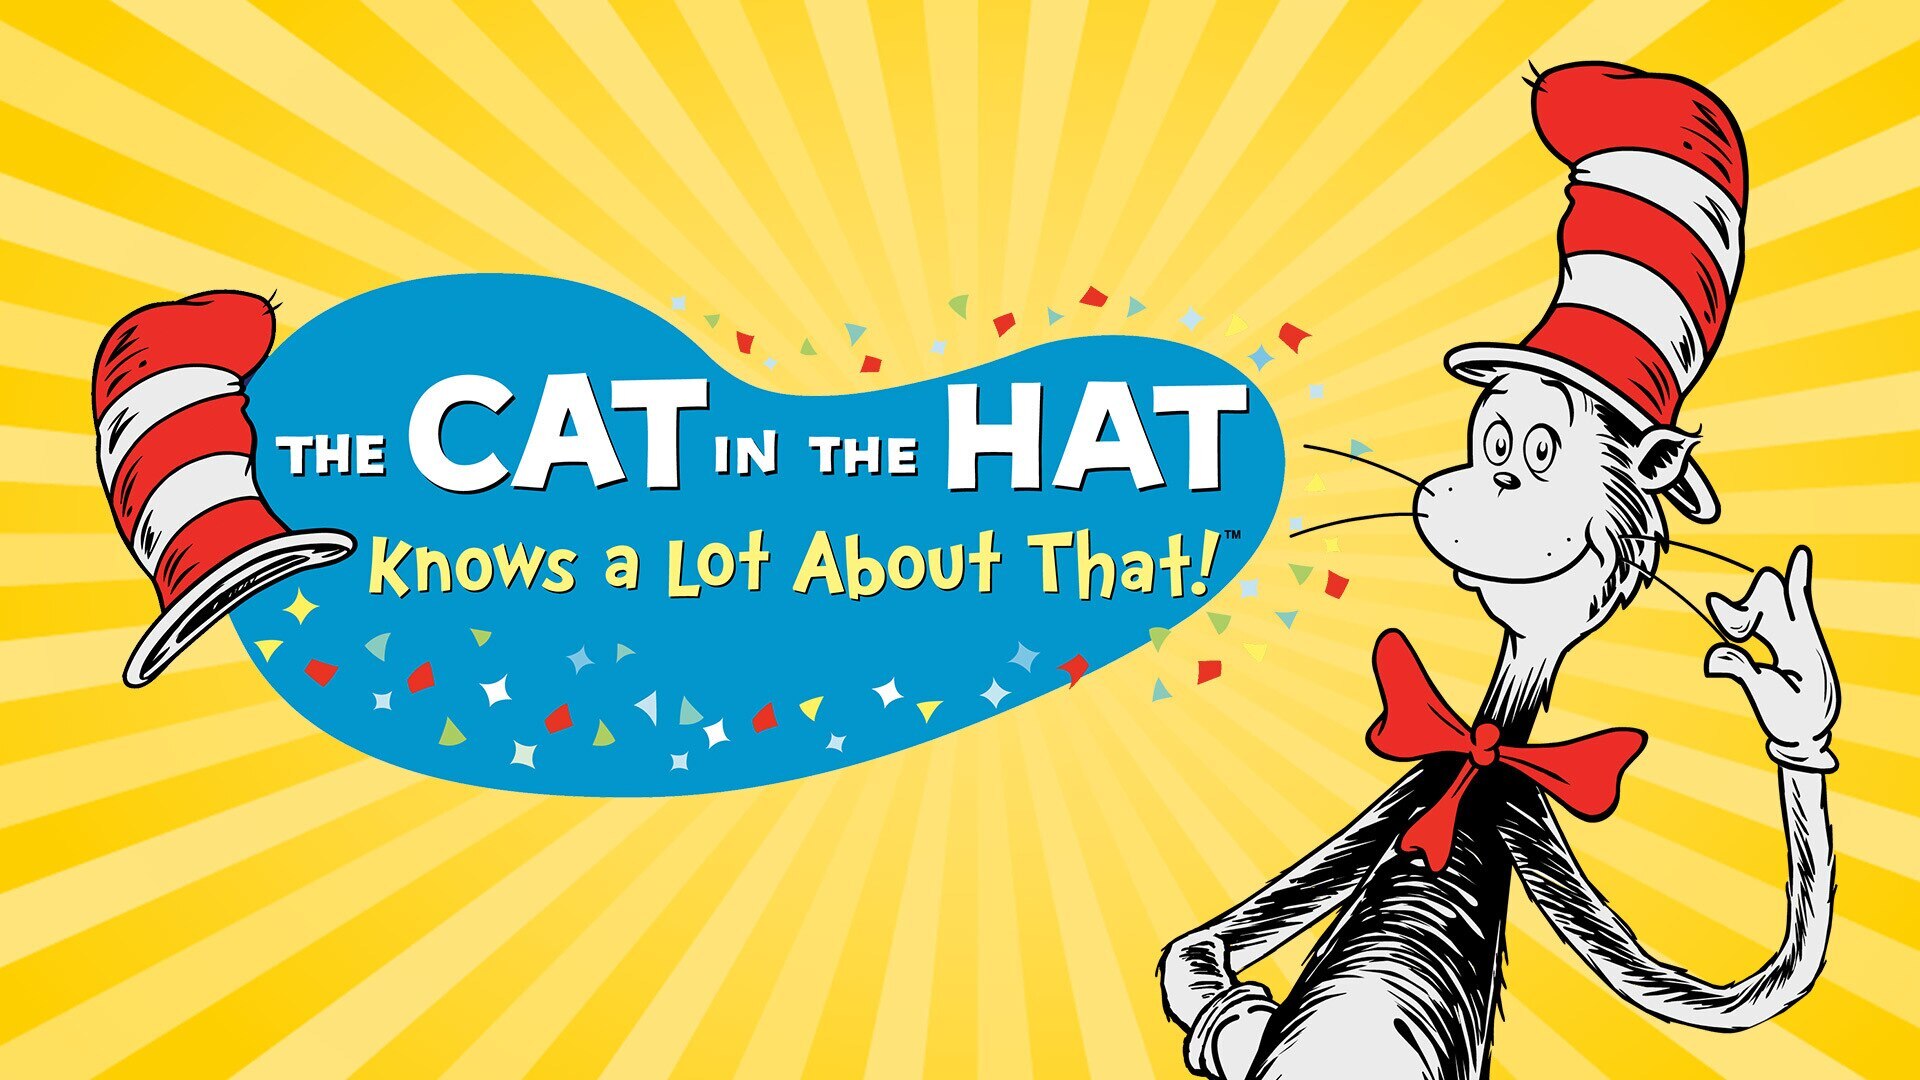 The Cat In The Hat Knows A Lot About That! Wallpapers - Wallpaper Cave